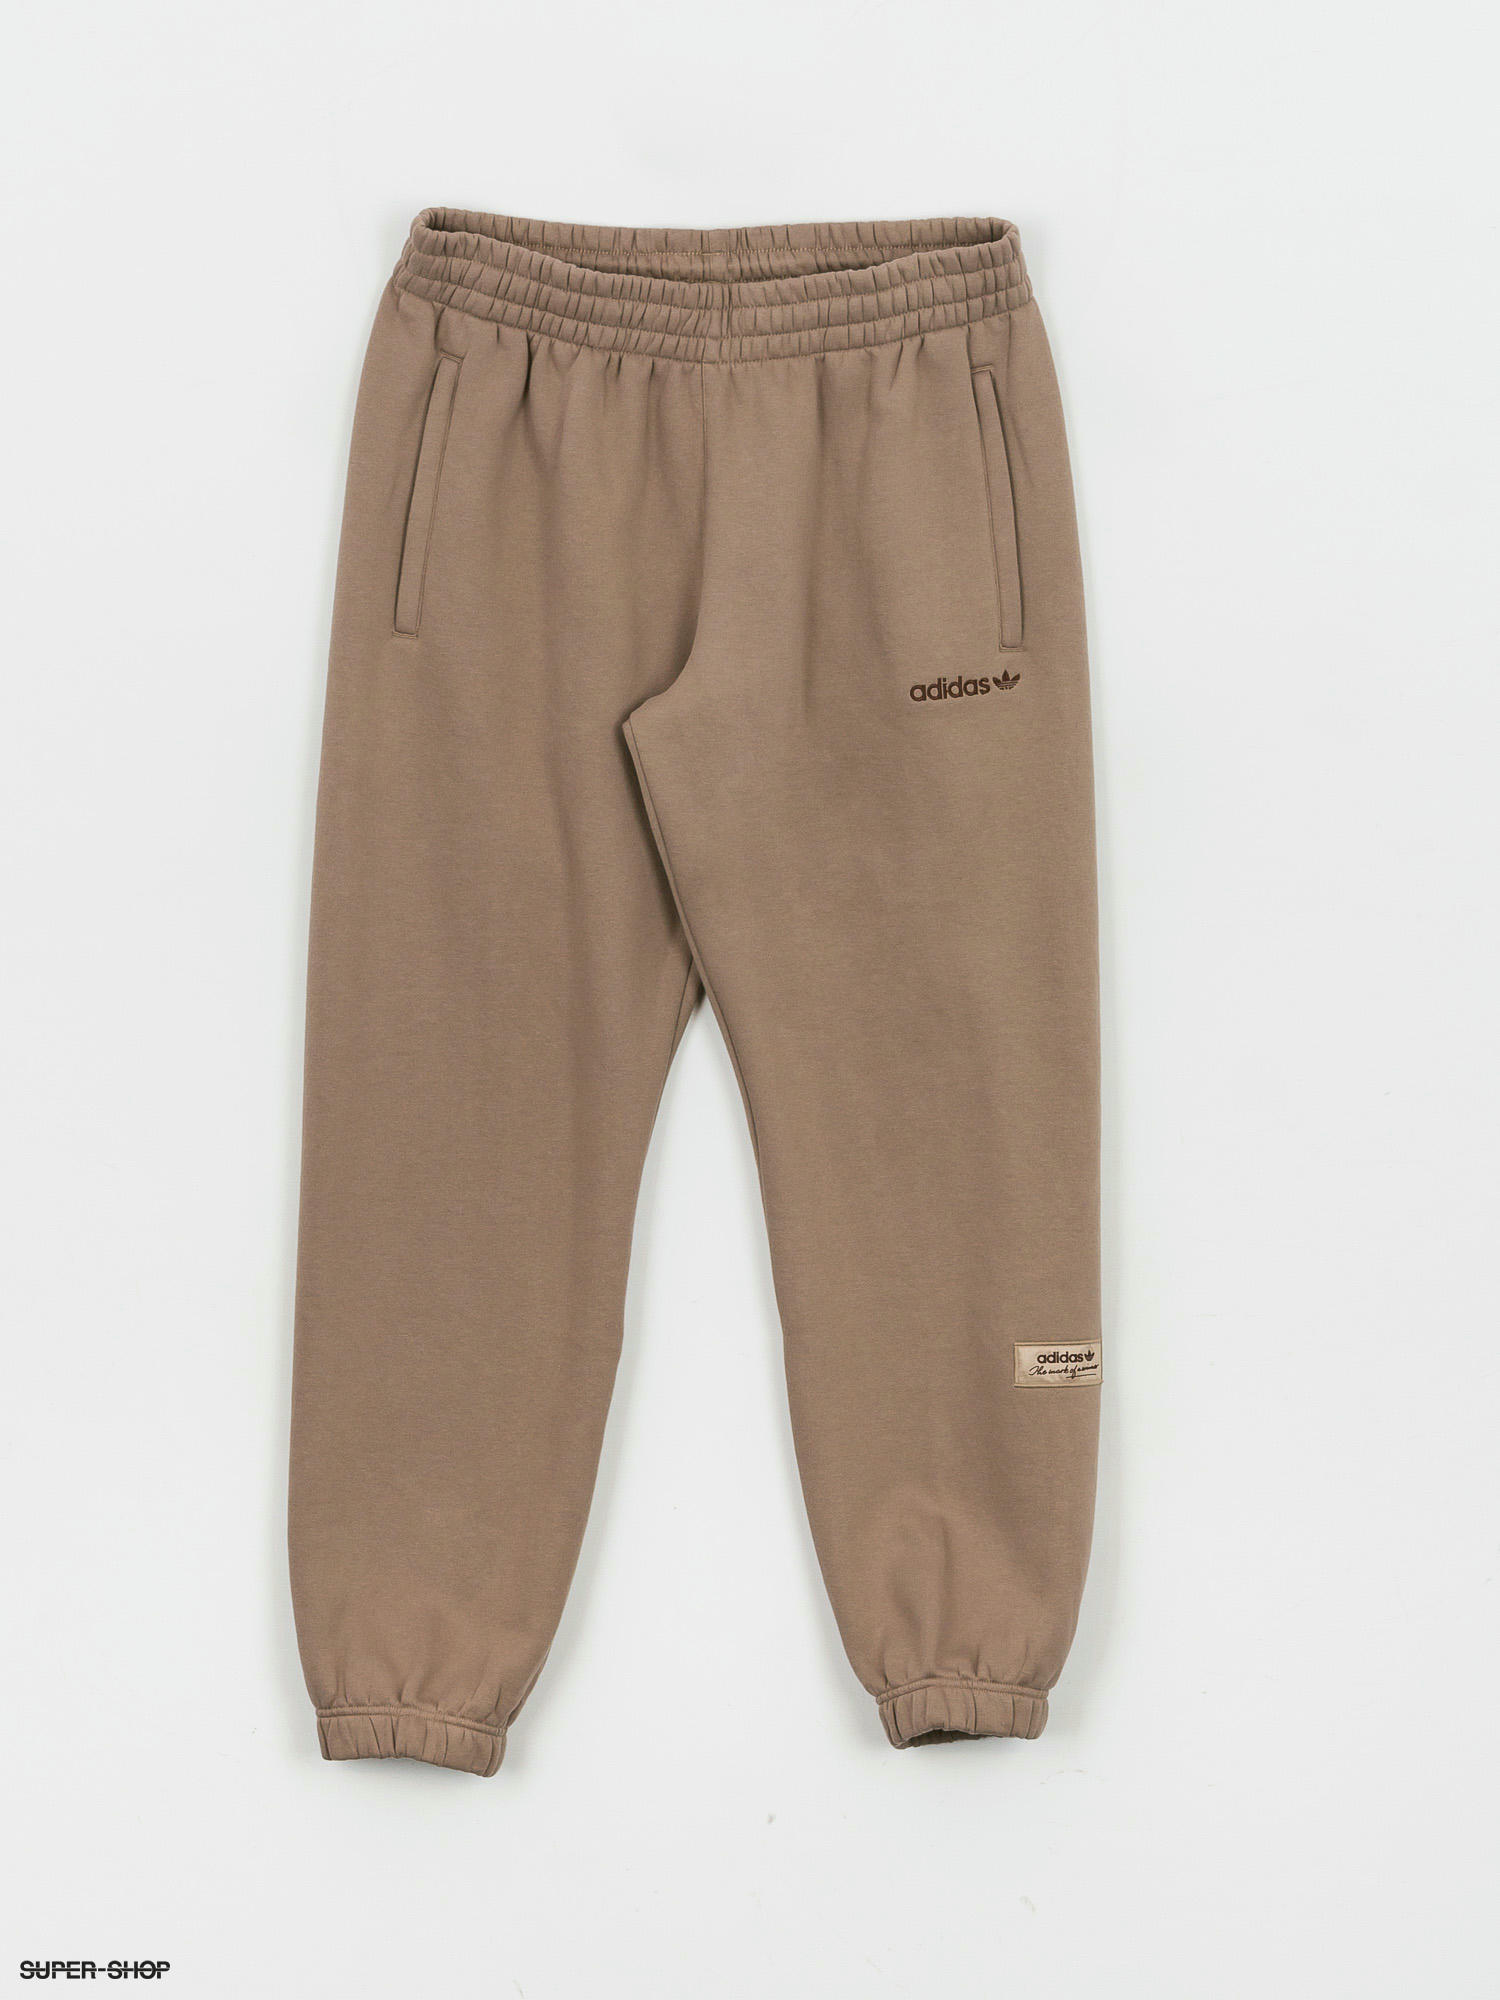 adidas Originals TRF (chalky Linear brown) Pants